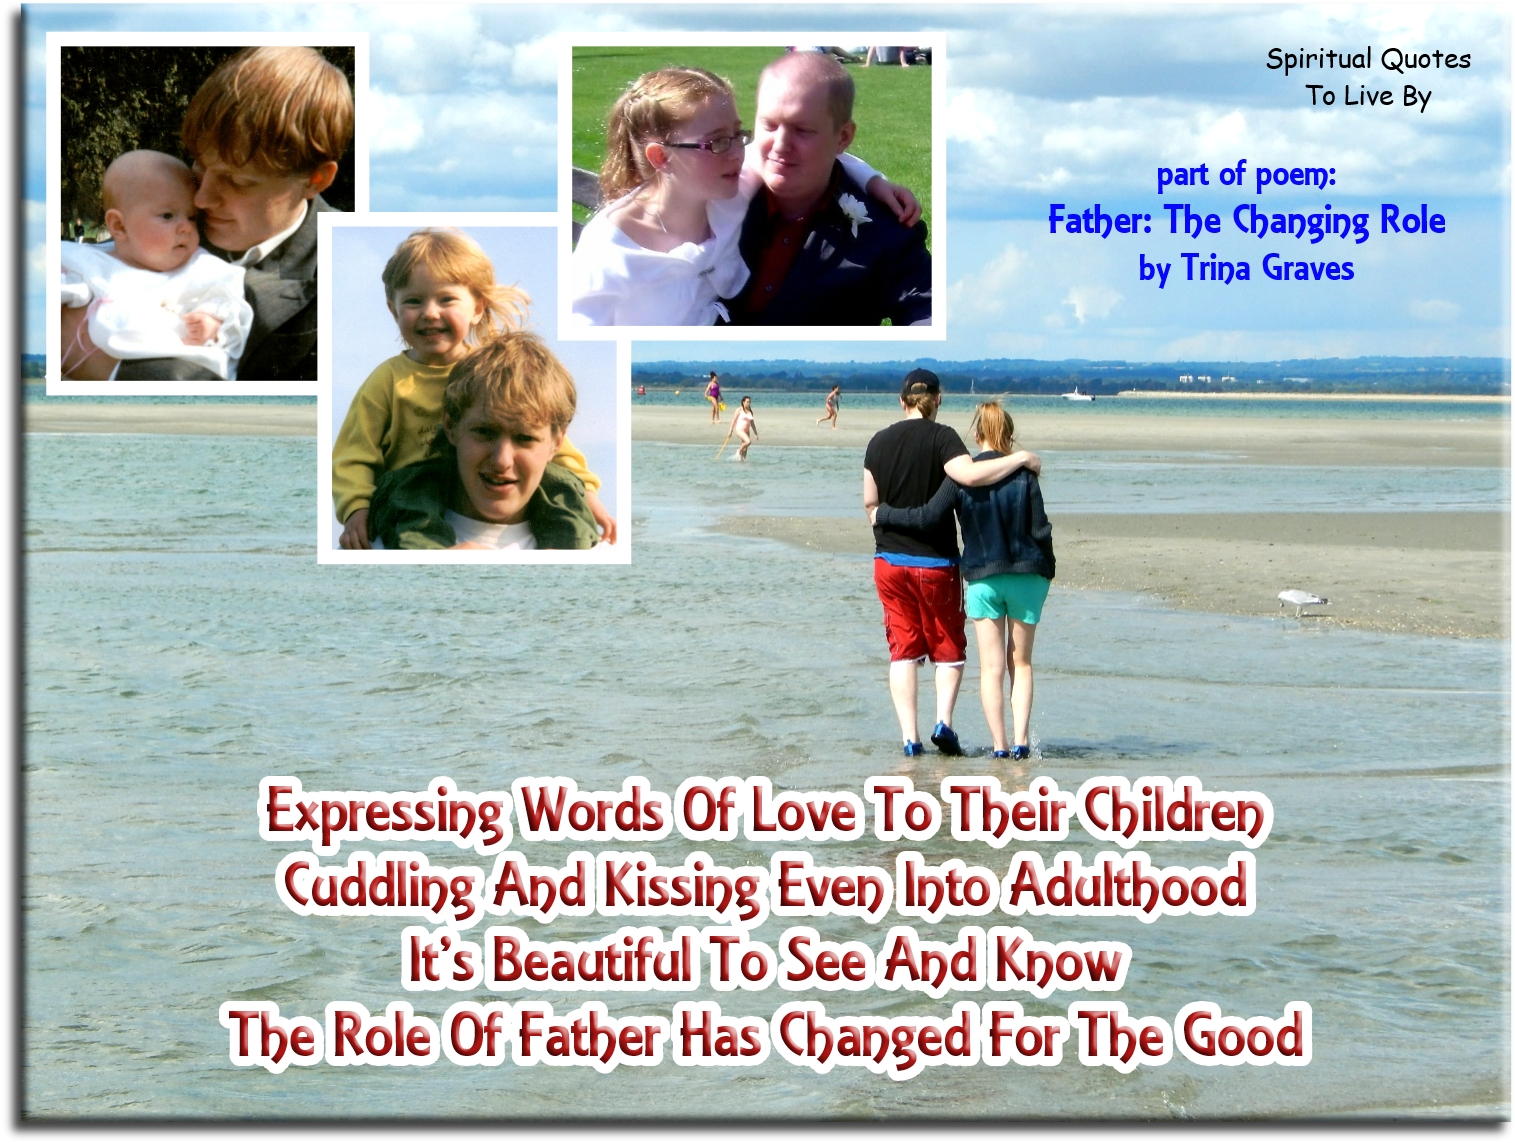 quote from poem by Trina Graves - Father: The Changing Role - Spiritual Quotes To Live By